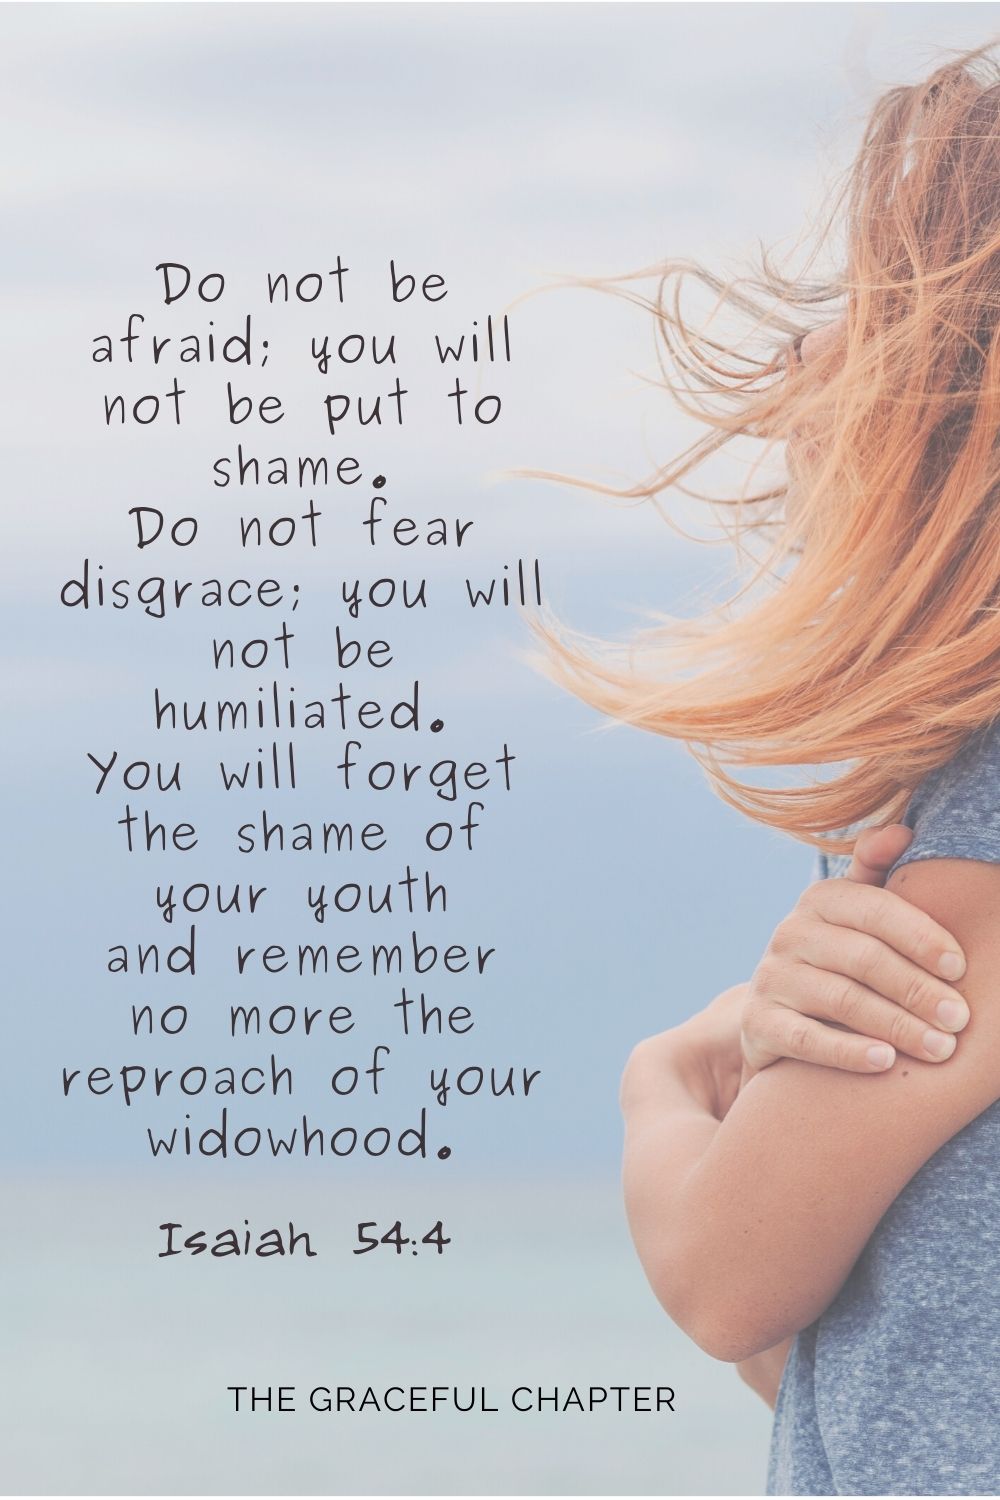 Do not be afraid; you will not be put to shame. Do not fear disgrace; you will not be humiliated. You will forget the shame of your youth and remember no more the reproach of your widowhood.Do not be afraid; you will not be put to shame. Do not fear disgrace; you will not be humiliated. You will forget the shame of your youth and remember no more the reproach of your widowhood. Isaiah 54:4